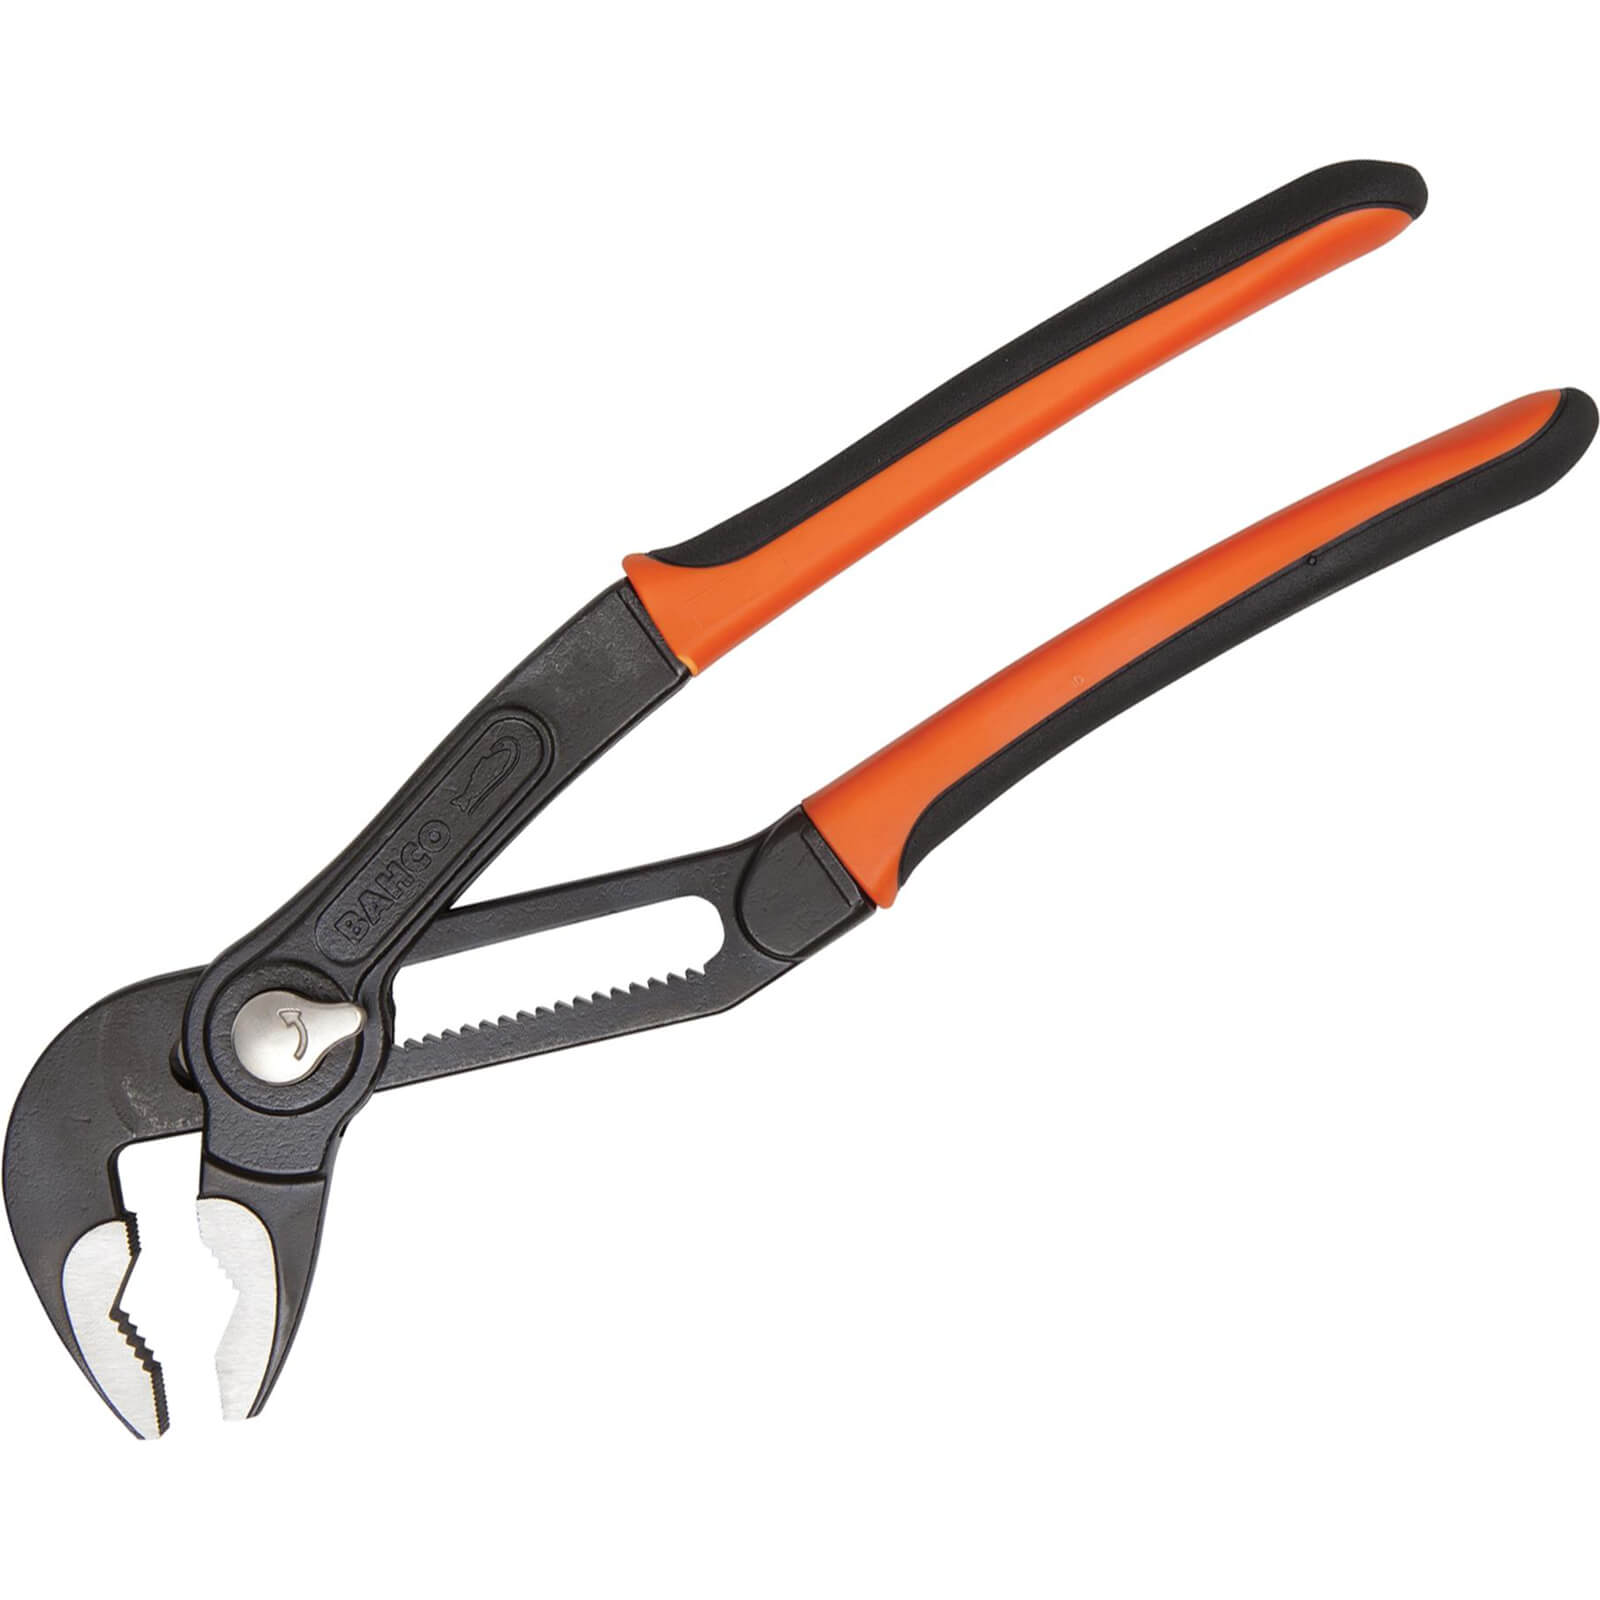 Image of Bahco 7223 Quick Adjust Slip Joint Pliers 200mm